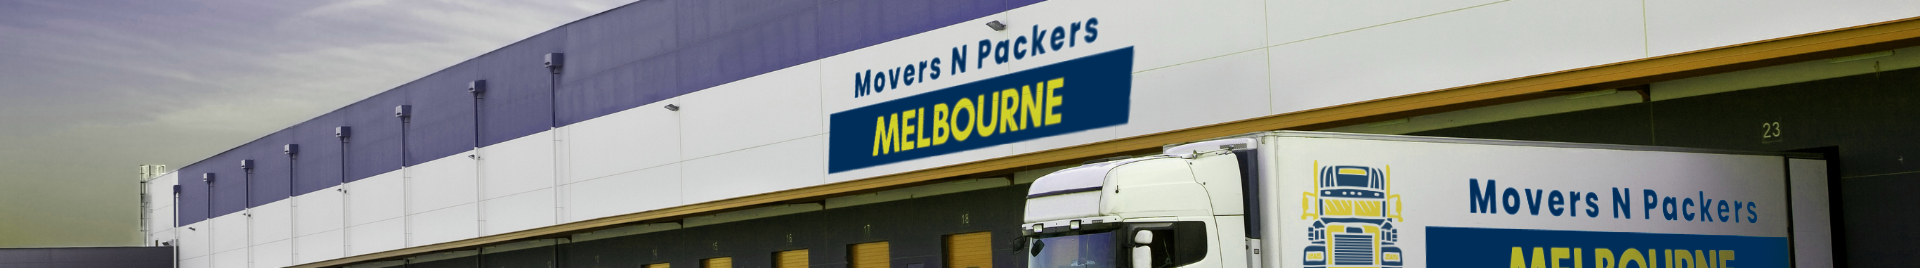 Movers N Packers Melbournes profilbanner